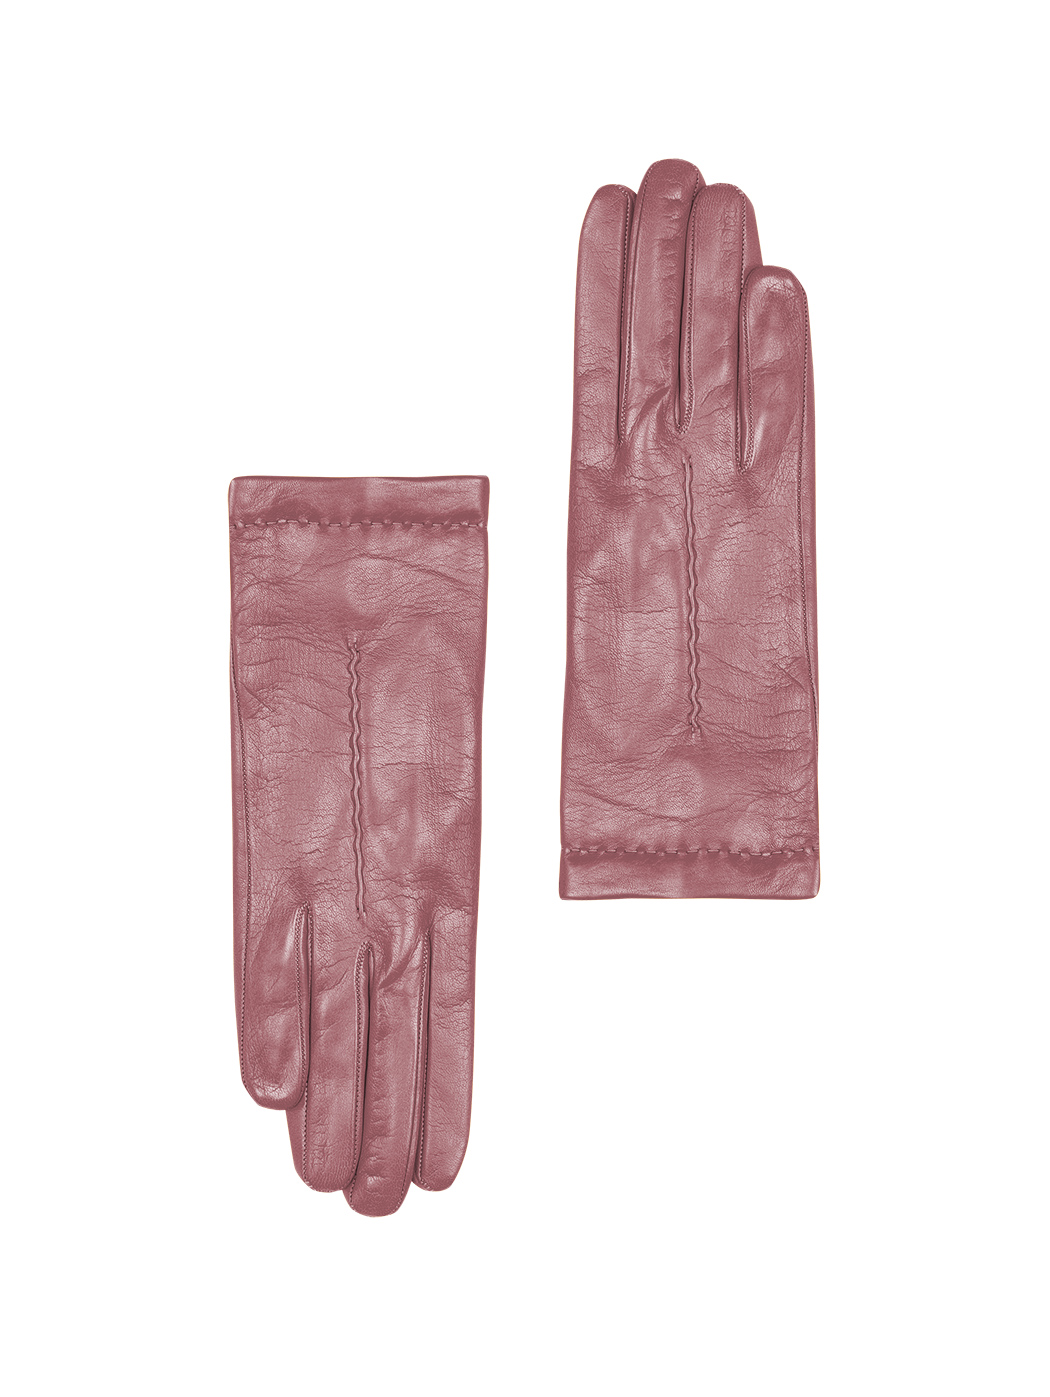 Women's Silk lined Gloves in Pink Leather